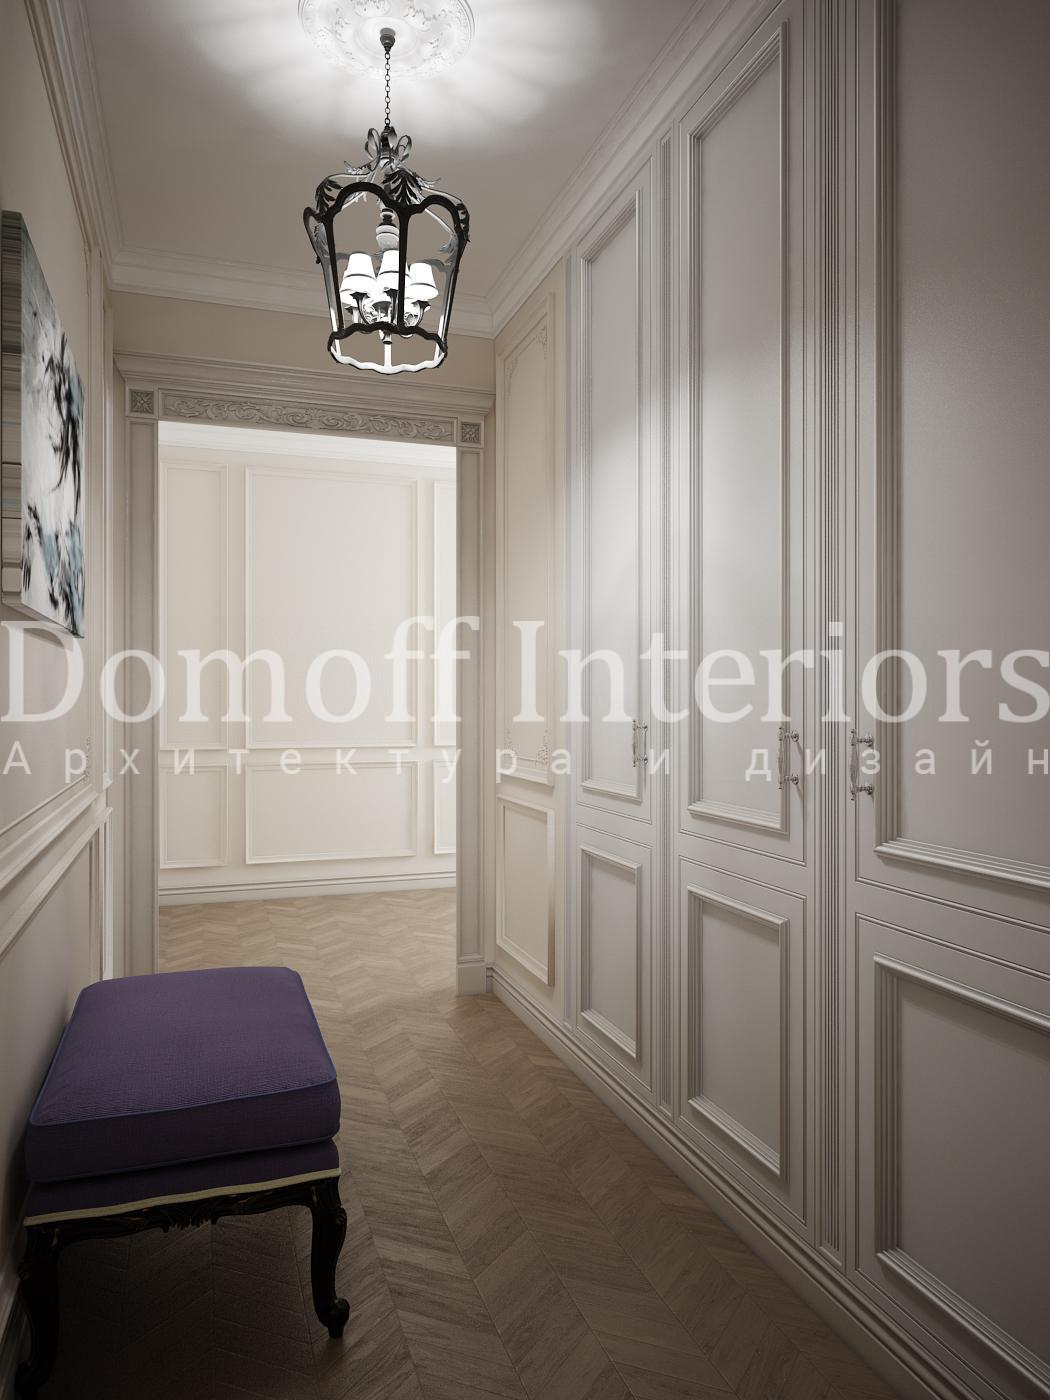 Entrance hall made in the style of Contemporary classics